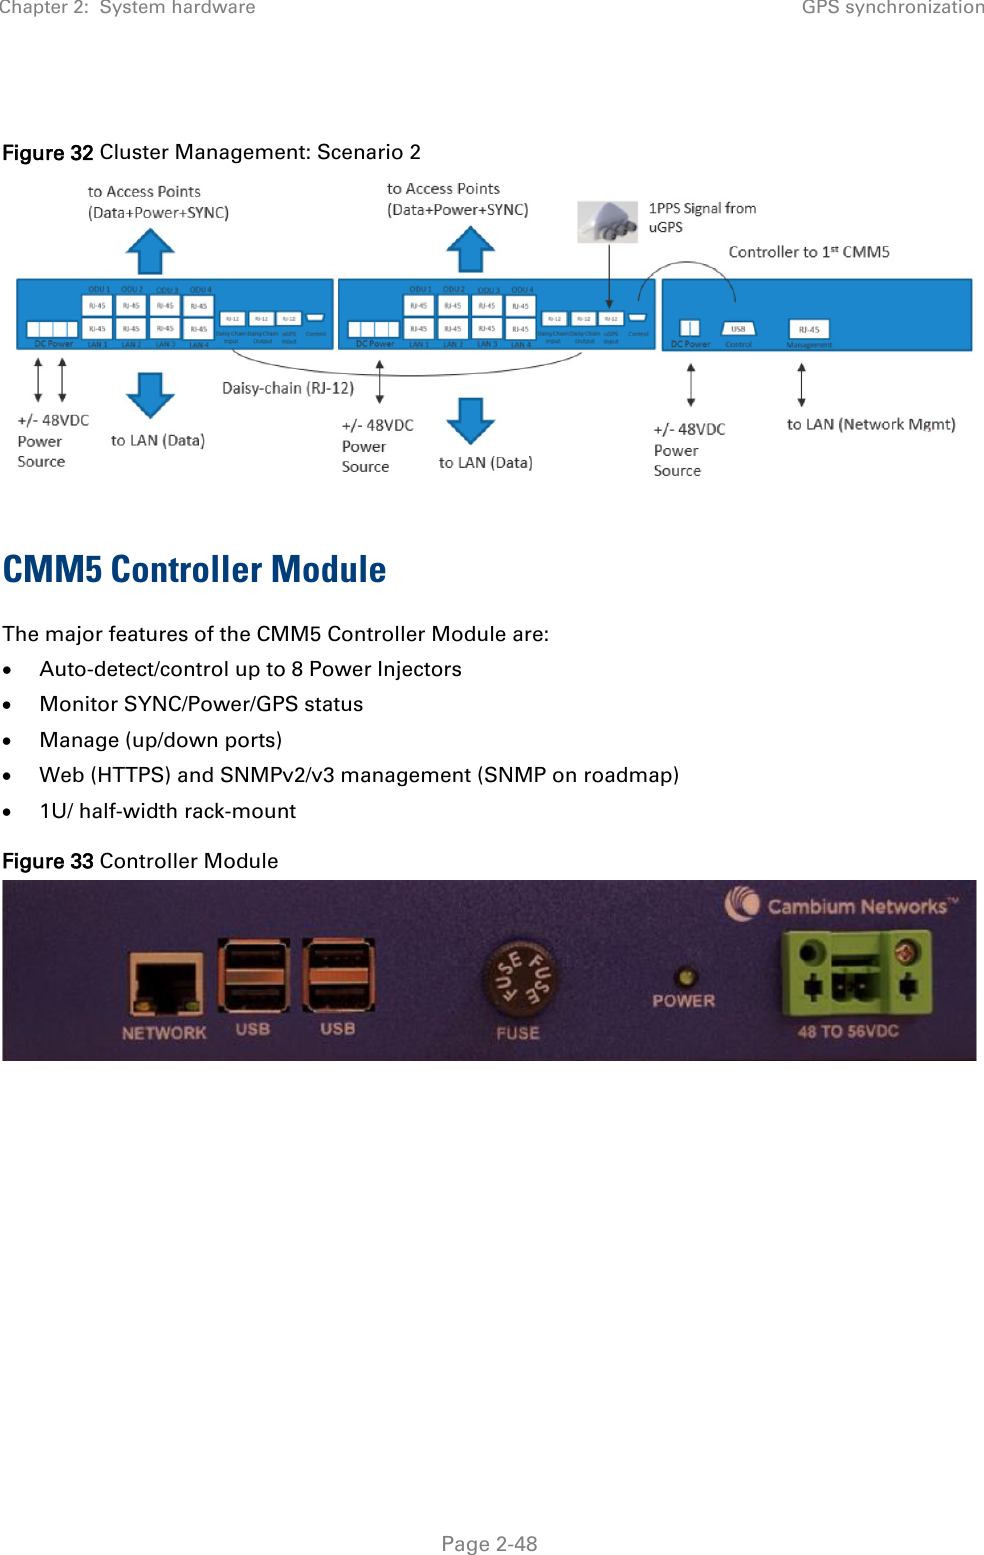 Chapter 2:  System hardware GPS synchronization   Page 2-48  Figure 32 Cluster Management: Scenario 2  CMM5 Controller Module The major features of the CMM5 Controller Module are: • Auto-detect/control up to 8 Power Injectors • Monitor SYNC/Power/GPS status • Manage (up/down ports) • Web (HTTPS) and SNMPv2/v3 management (SNMP on roadmap) • 1U/ half-width rack-mount Figure 33 Controller Module    